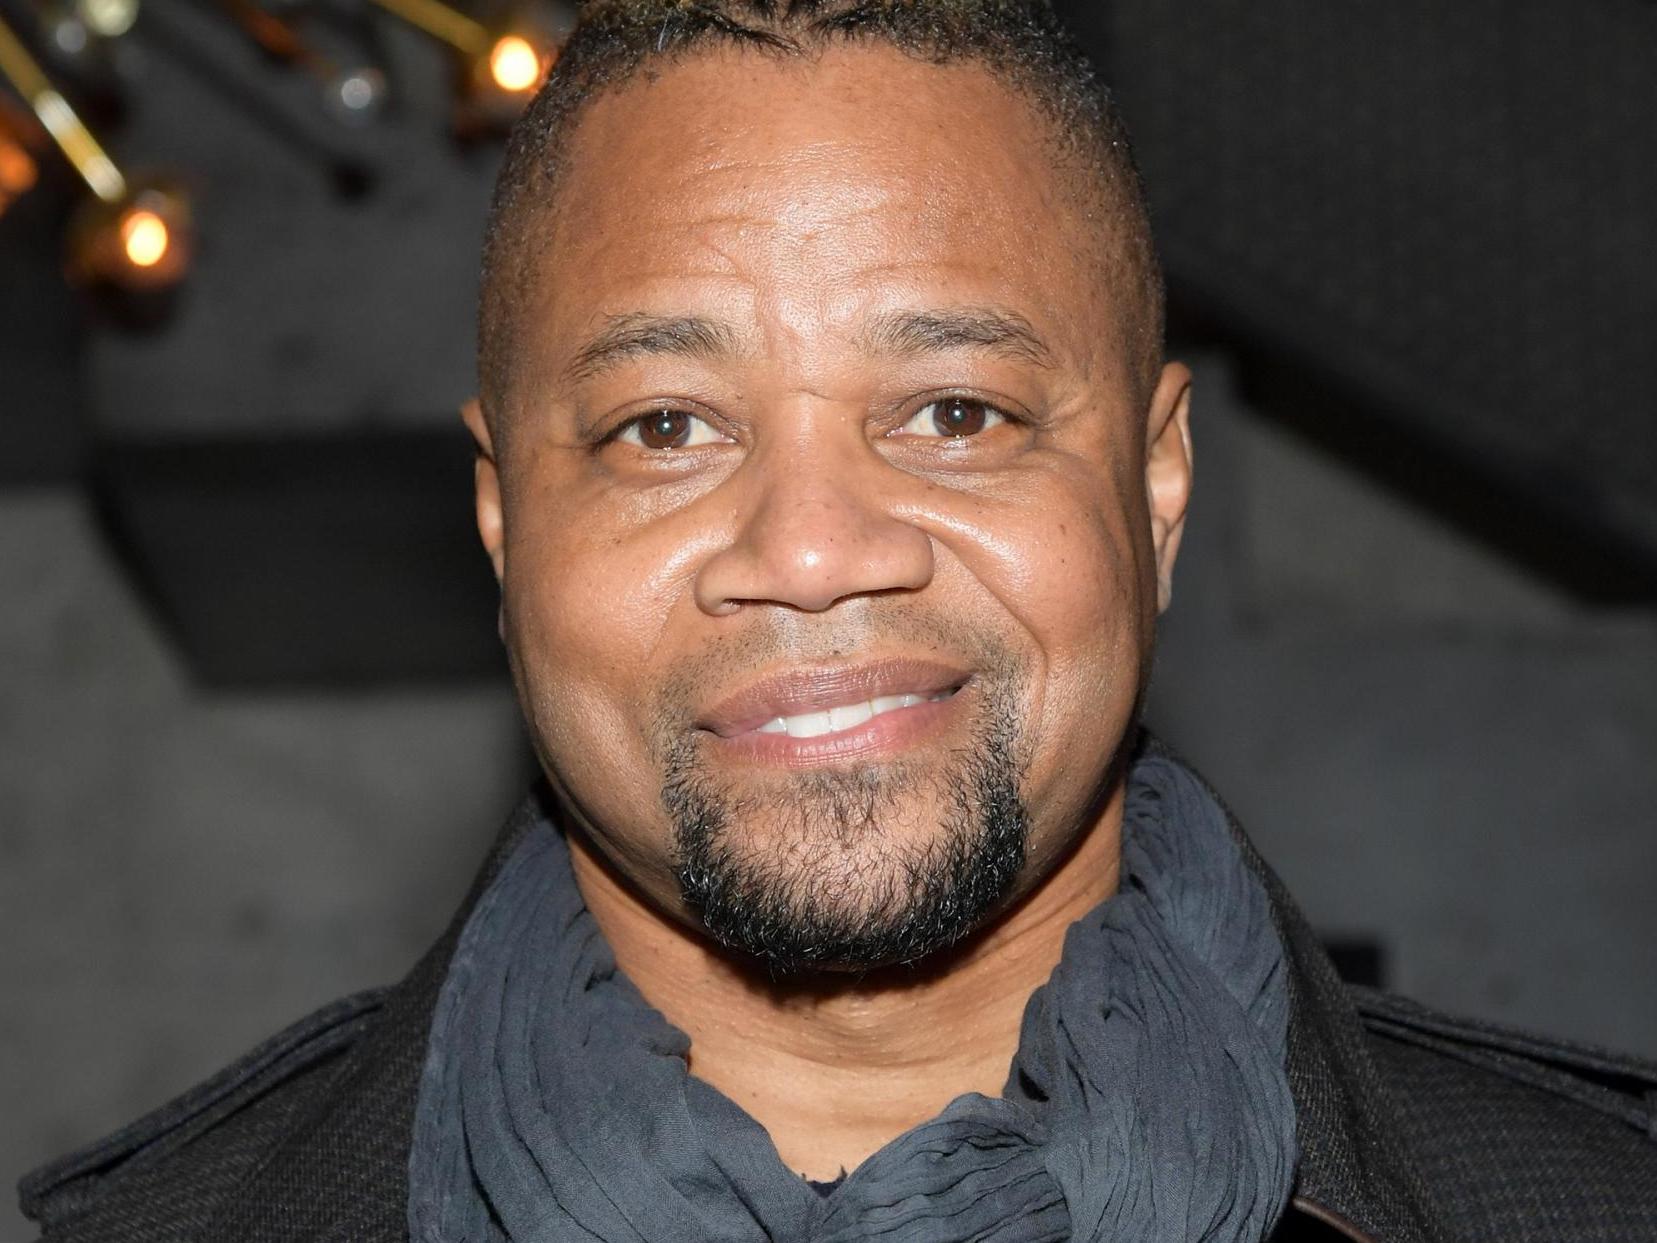 Cuba Gooding Jr handed himself over to police after the allegation came to light